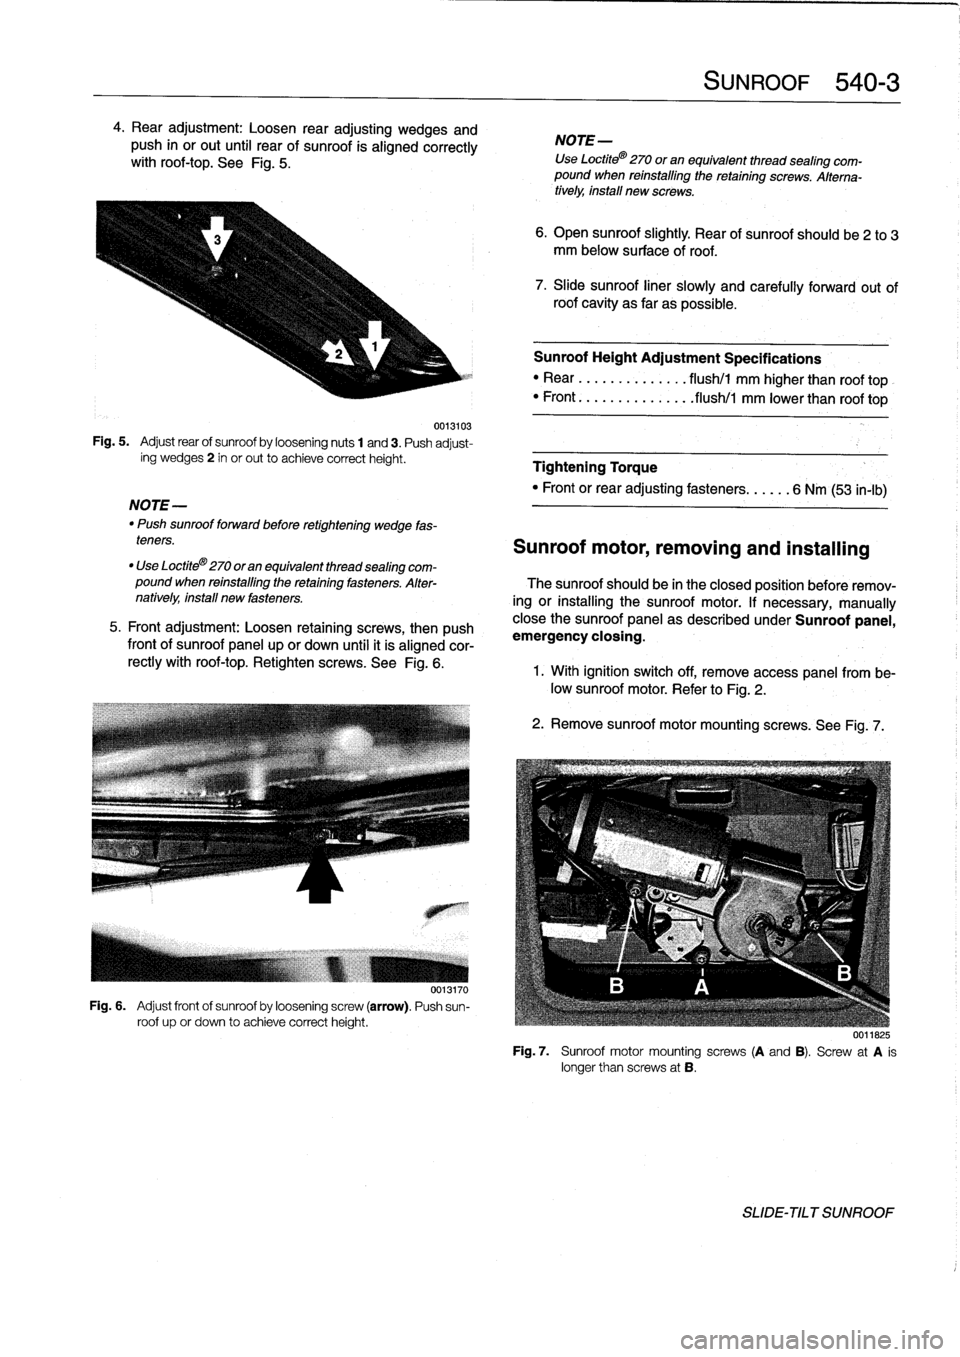 BMW 318i 1996 E36 Workshop Manual 4
.
Rear
adjustment
:
Loosen
rear
adjusting
wedges
and
push
in
or
out
until
rear
of
sunroof
is
aligned
correctly
withroof-top
.
See
Fig
.
5
.

0013103
Fig
.
5
.

	

Adjust
rear
of
sunroof
by
loosening